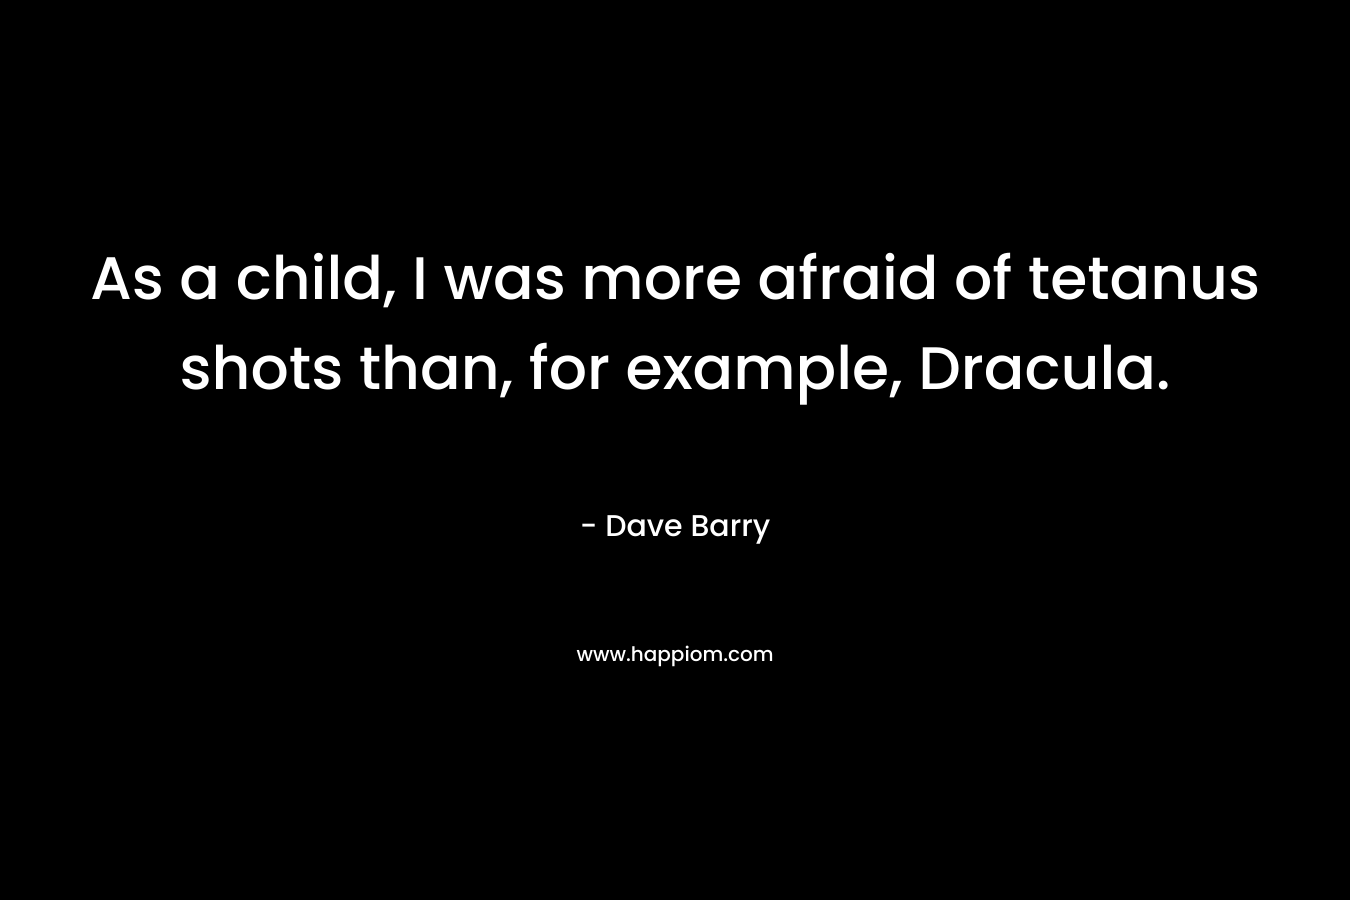 As a child, I was more afraid of tetanus shots than, for example, Dracula. – Dave Barry